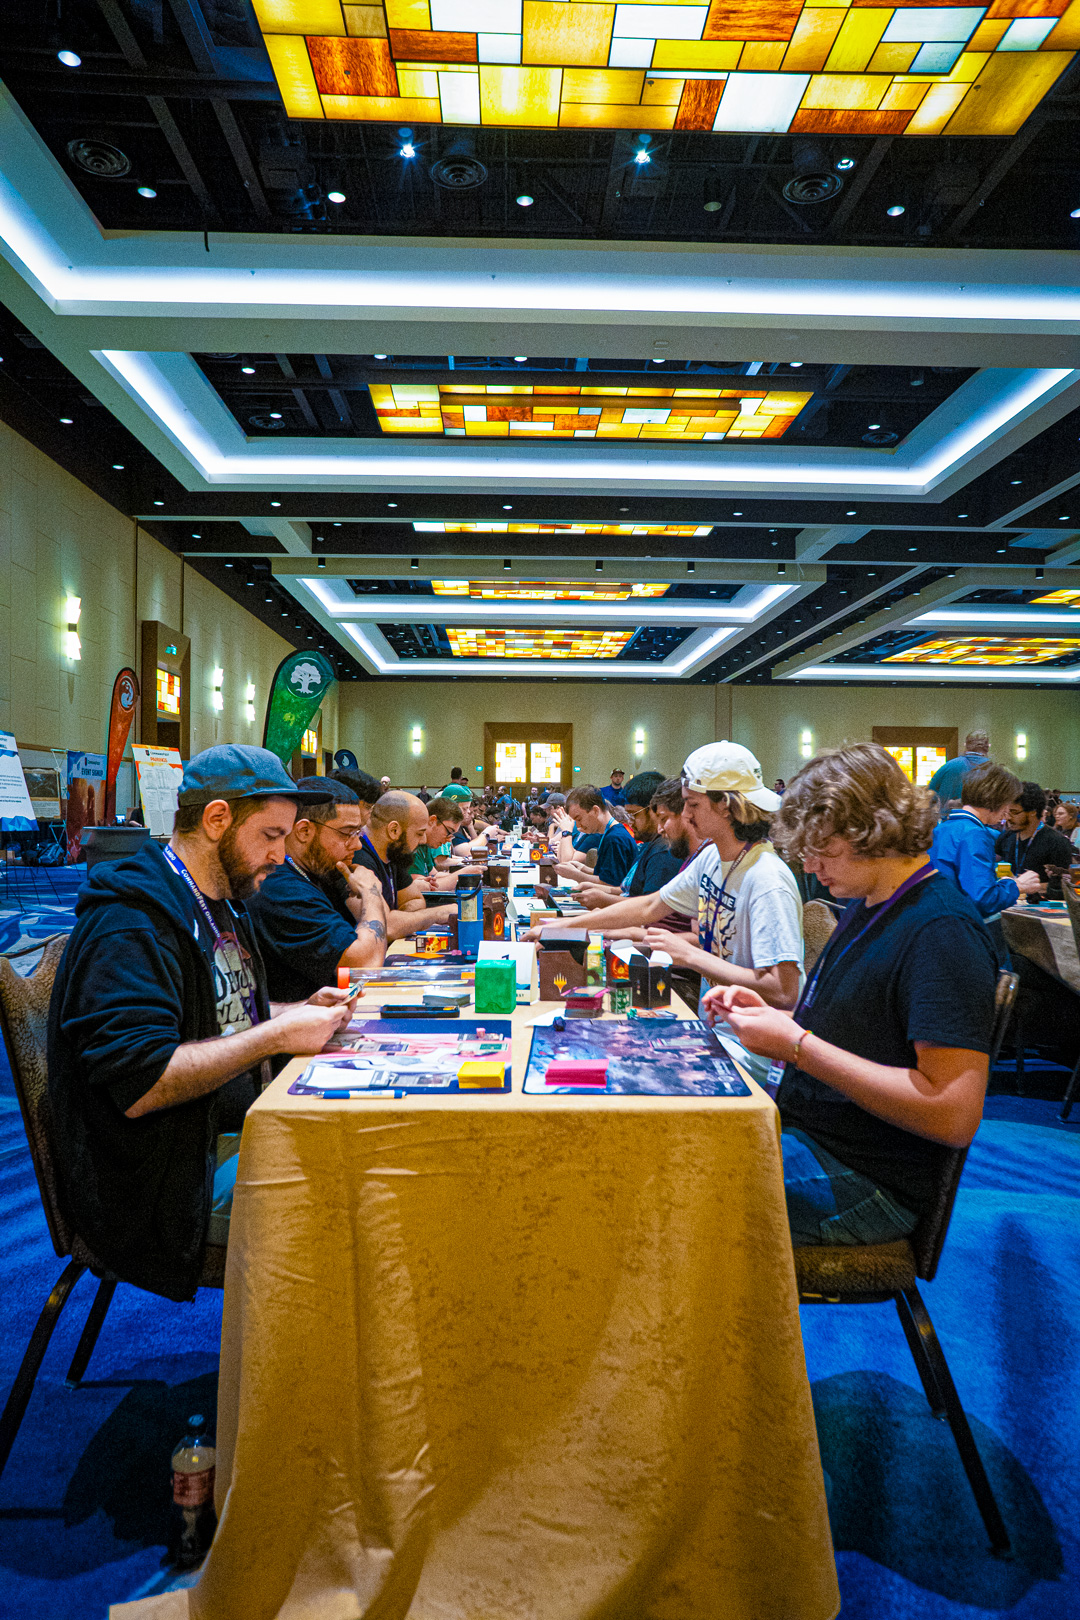 Vertical shot of long table filled with people participating in a prerelease event